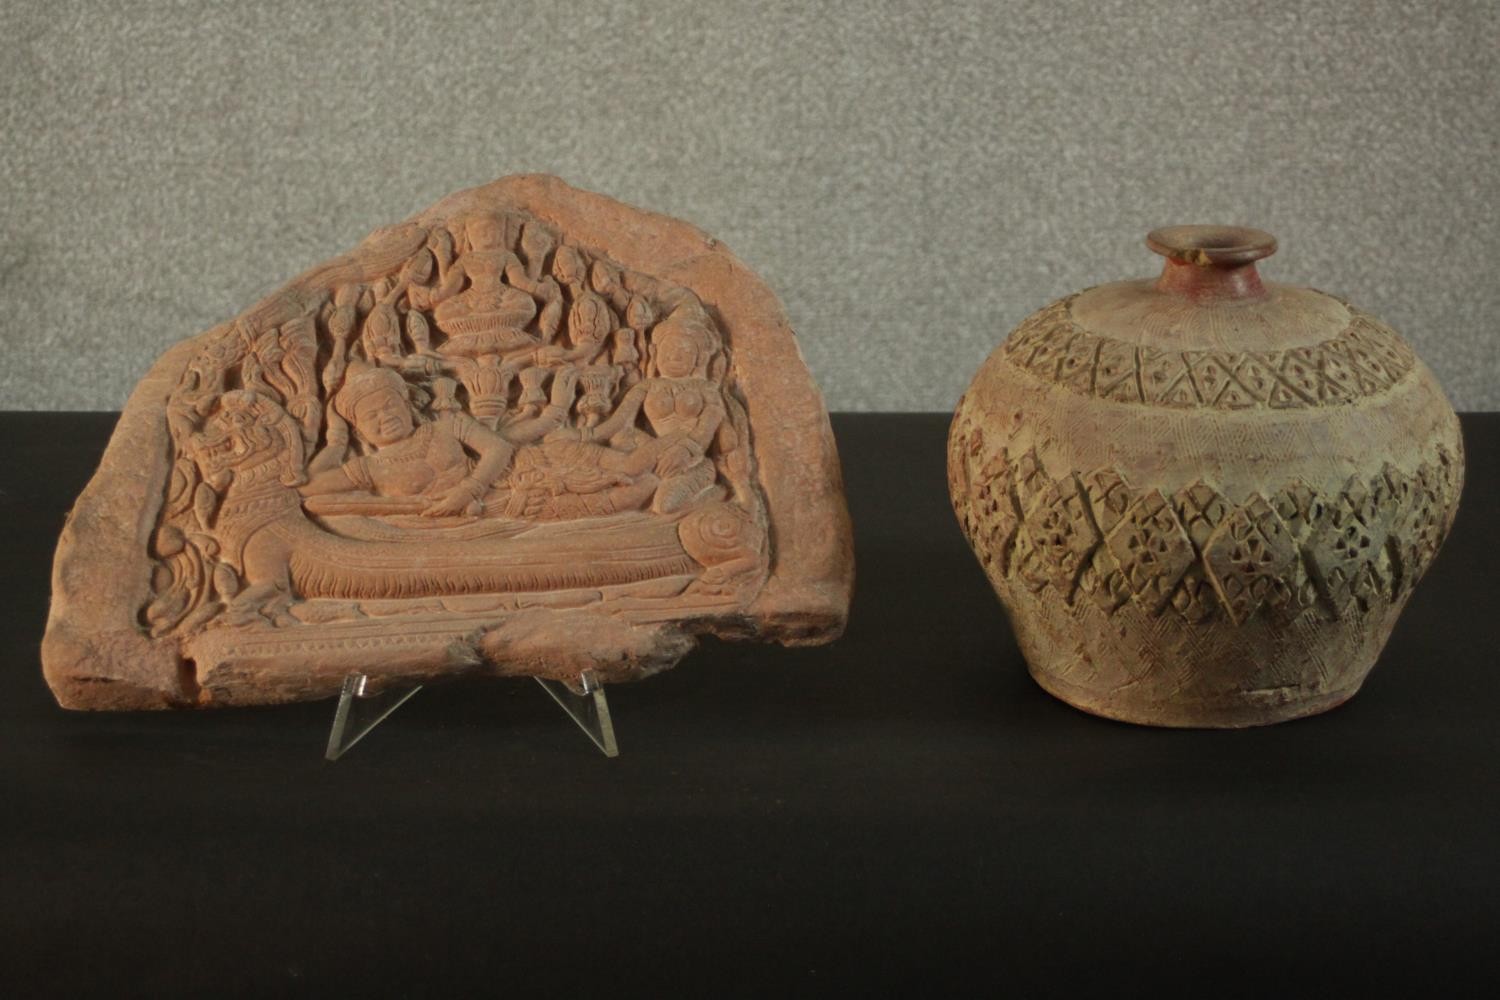 A relief clay tablet depicting Indian deities along with a ceramic vase with incised geometric